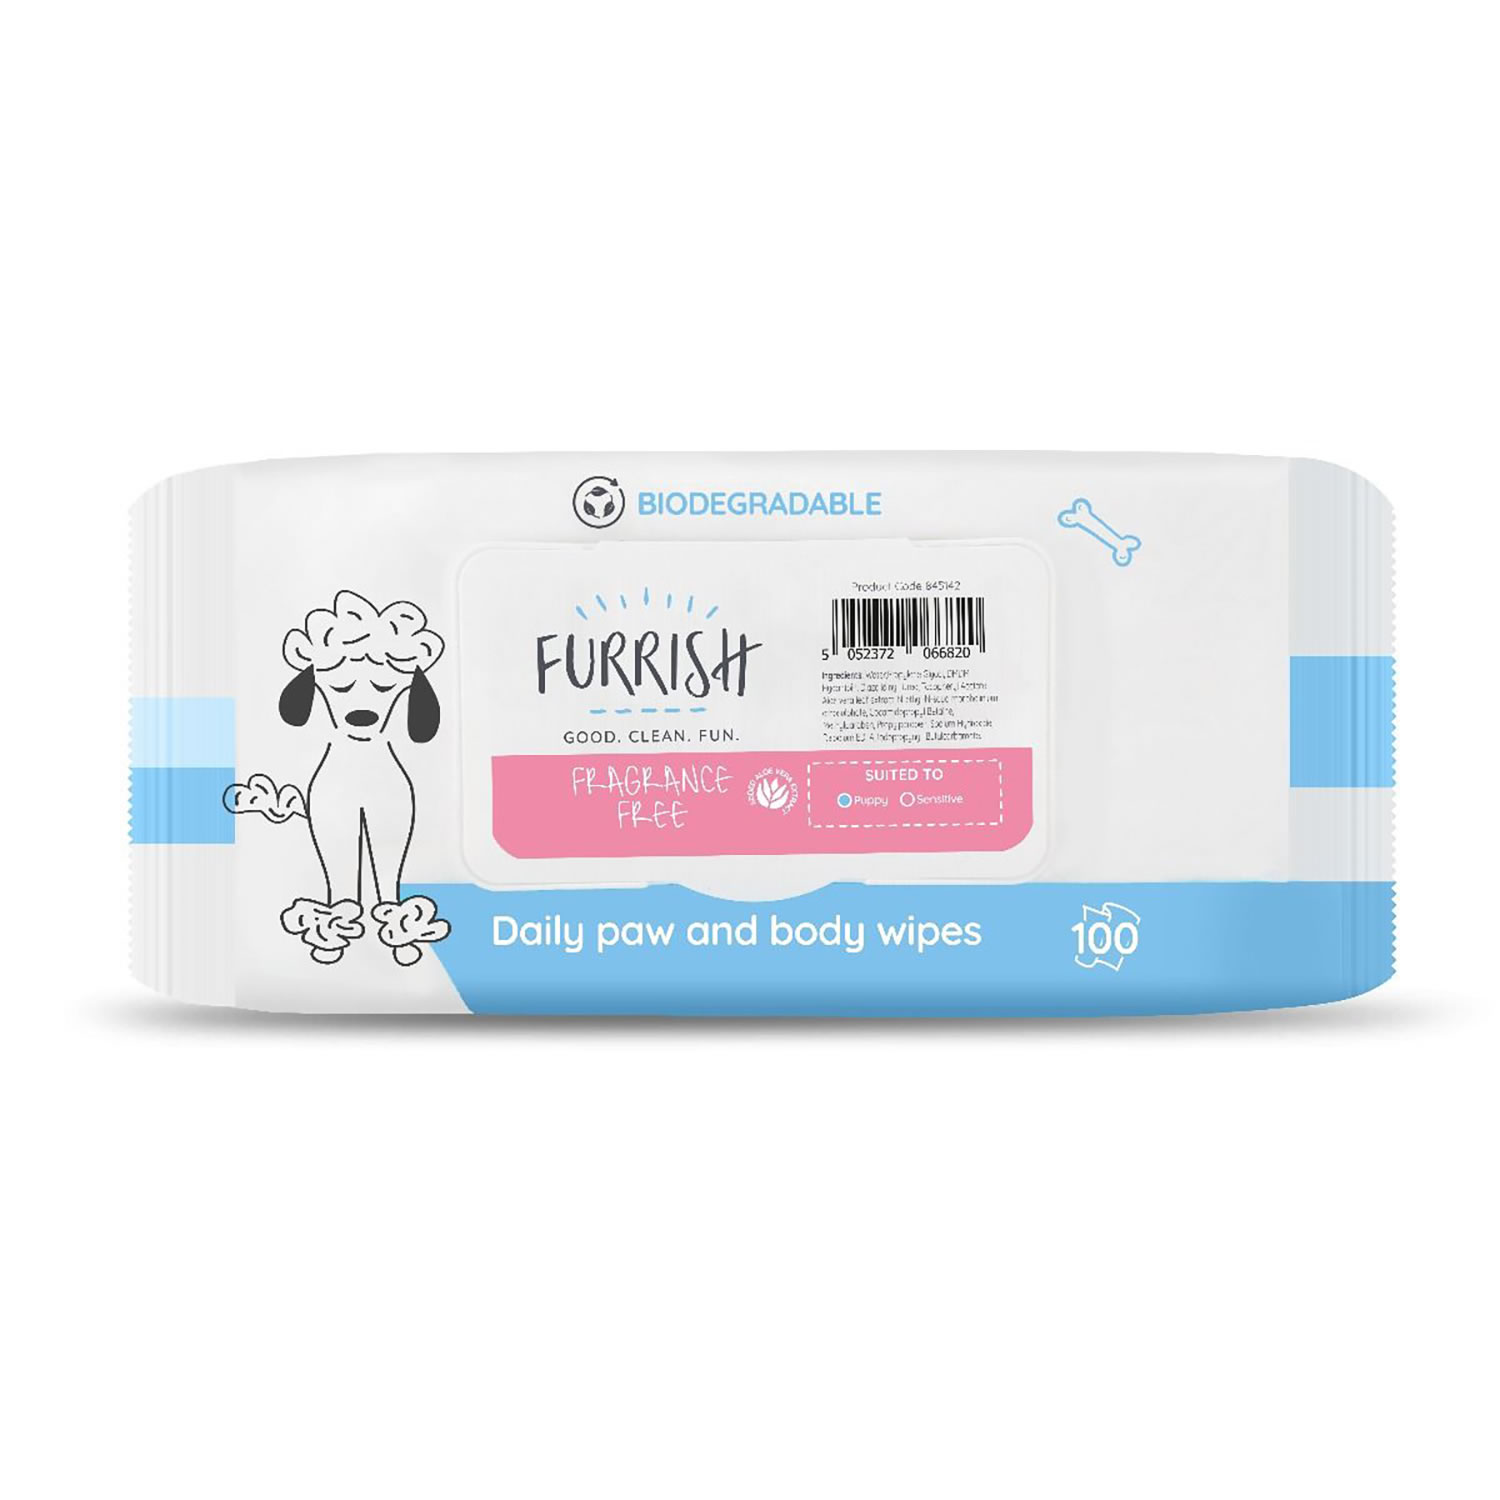 FURRISH DAILY PAW & BODY WIPES FRAGRANCE FREE  100 PACK